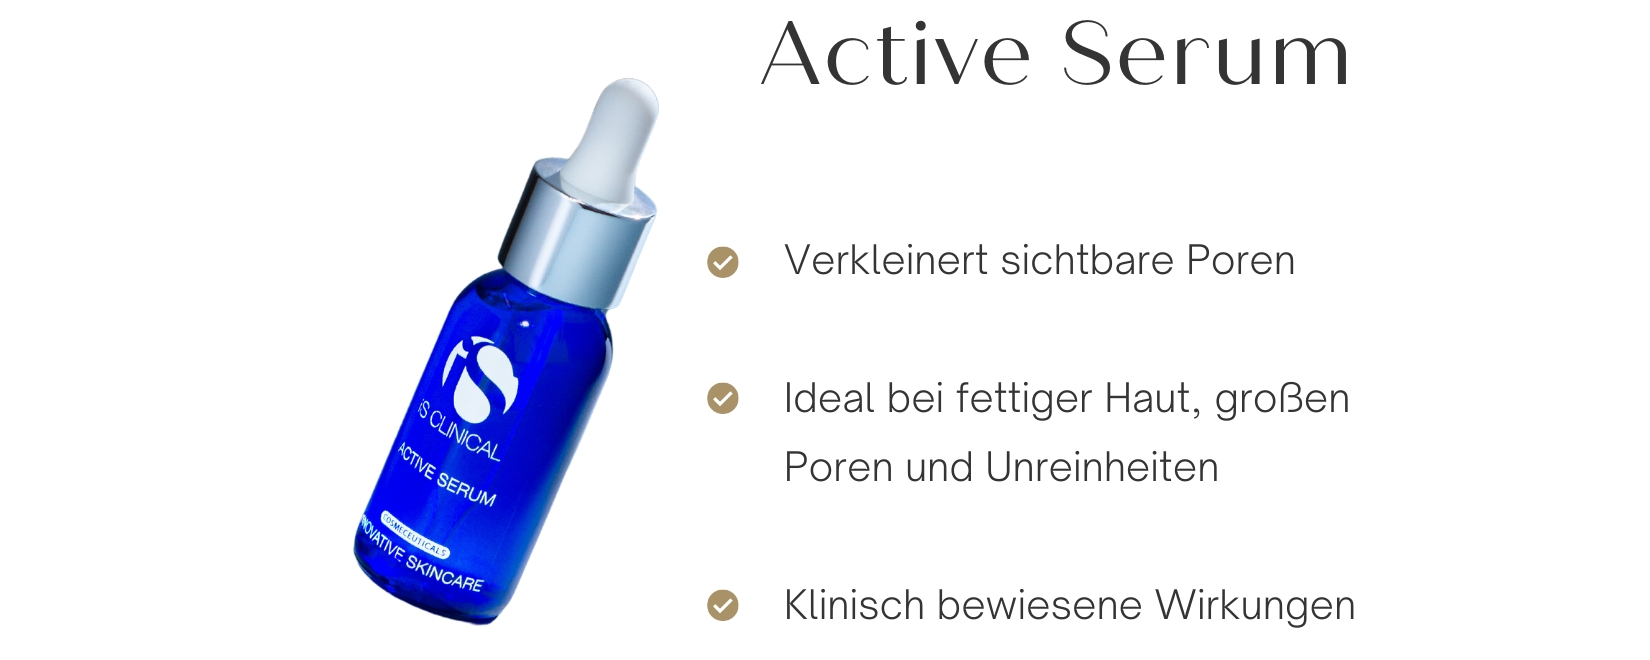 Active Serum von iS Clinical bei Facial Room Skincare Online Shop